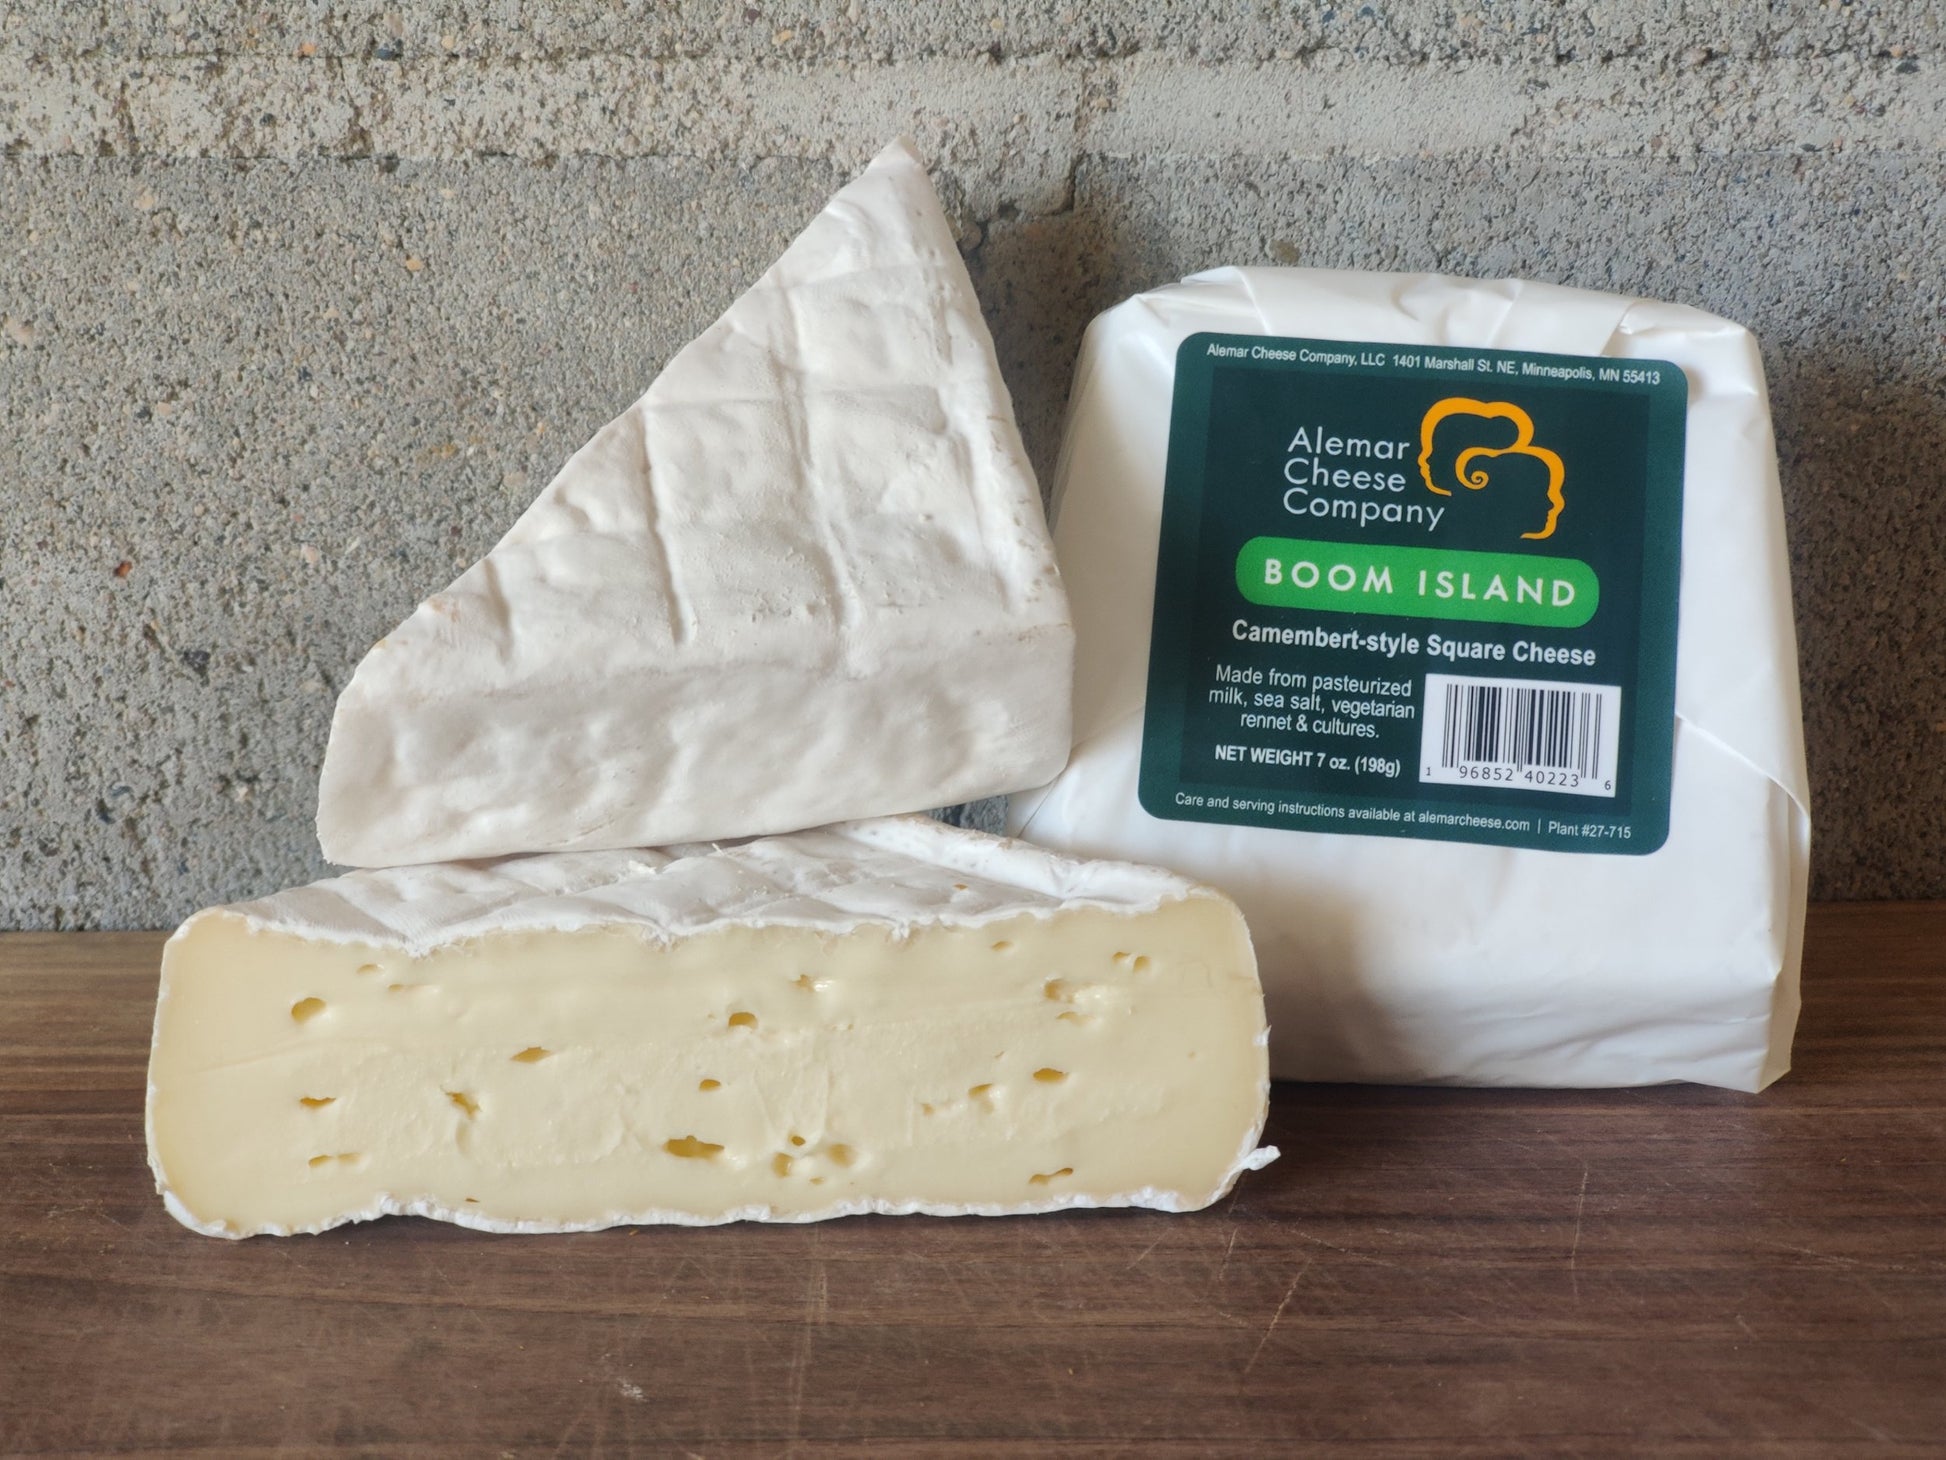 Package of Boom Island cheese from Alemar Cheese Company